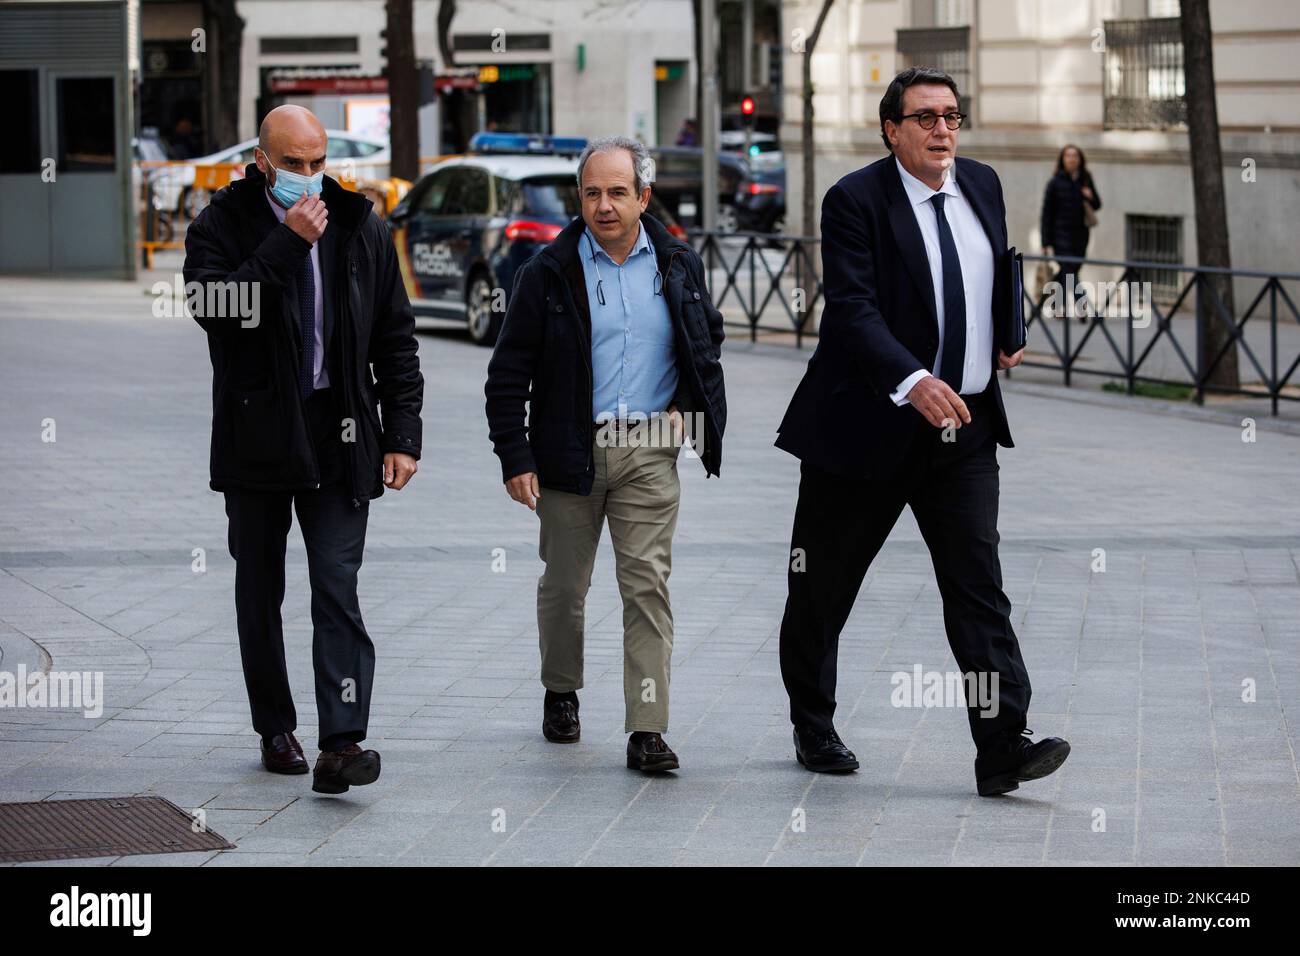 The former mayor of Boadilla del Monte Arturo González Panero 'El Albondiguilla' (c) and his lawyer Gustavo Galán (d) on his arrival at the Audiencia Nacional to hear whether he will be sent to prison in the framework of the Gürtel plot, on April 19, 2022, in Madrid (Spain). The former mayor has been summoned to this hearing to decide his imprisonment after being sentenced to 36 years and 11 months in prison for his involvement in the actions of the 'Gürtel' plot in the Madrid municipality. 19 APRIL 2022;EL ALBONDIGUILLA;PRISON;NATIONAL AUDIENCE Alejandro Martínez Vélez / Europa Press 04/19/20 Stock Photo